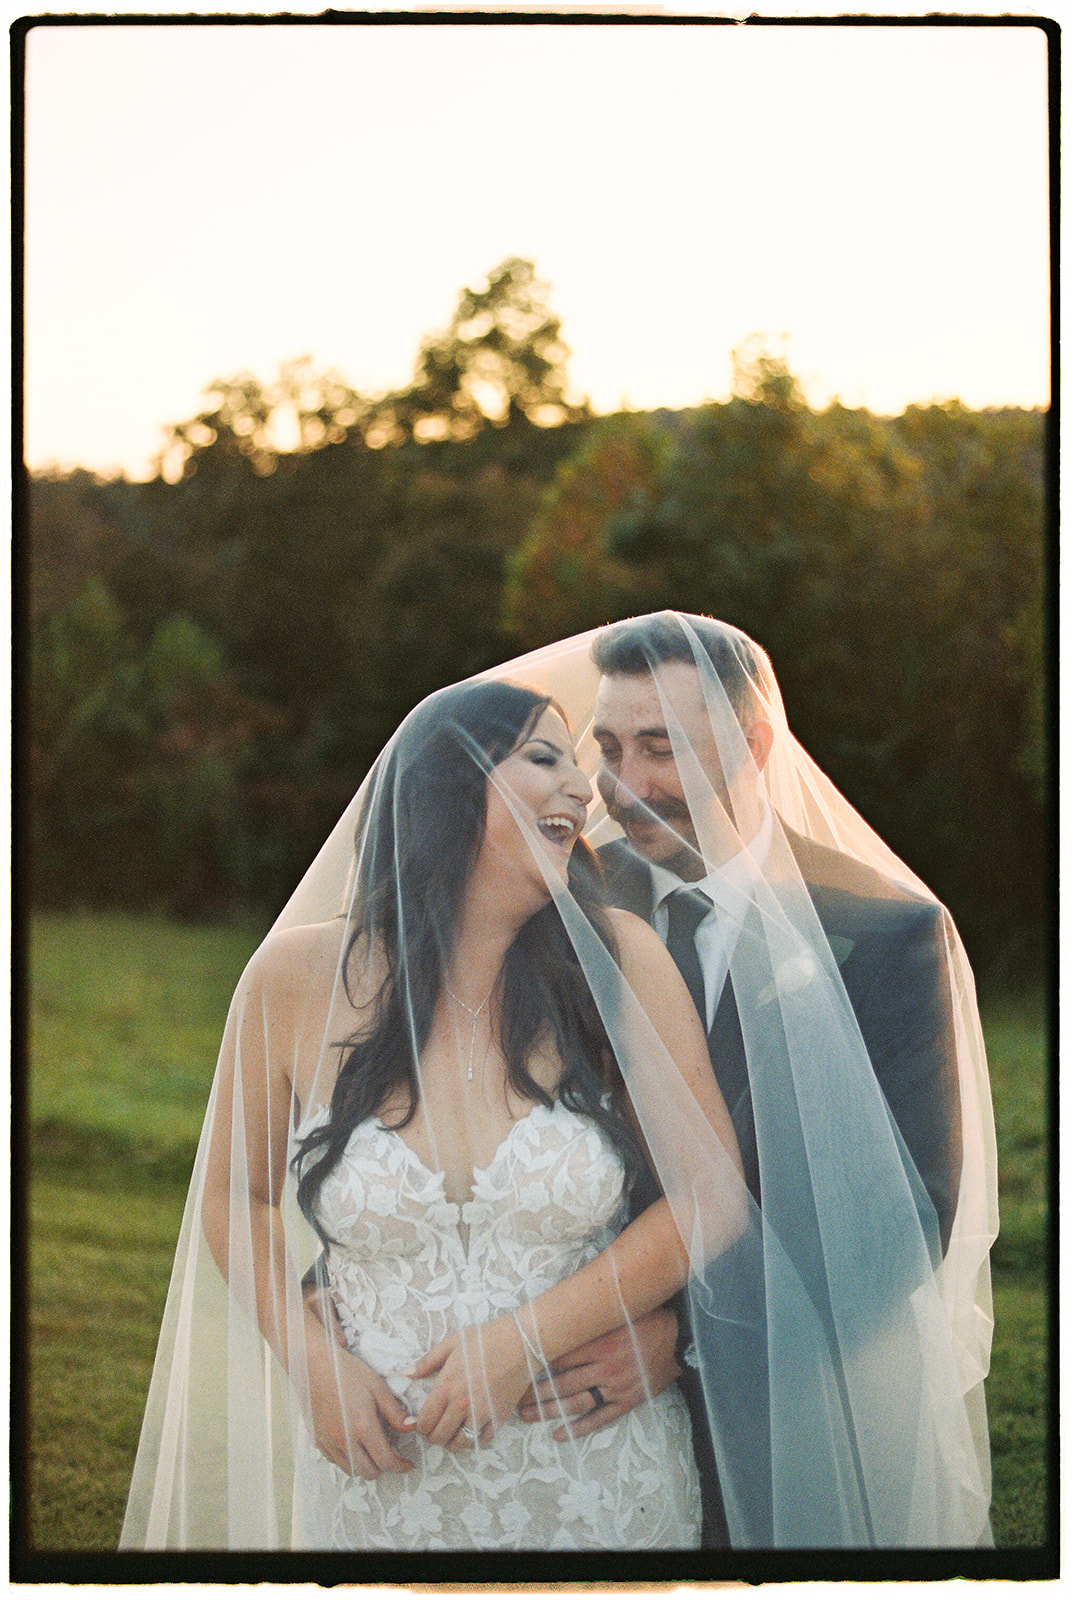 Newlyweds laugh while under a veil in a film photo from a Hybrid Wedding Photography